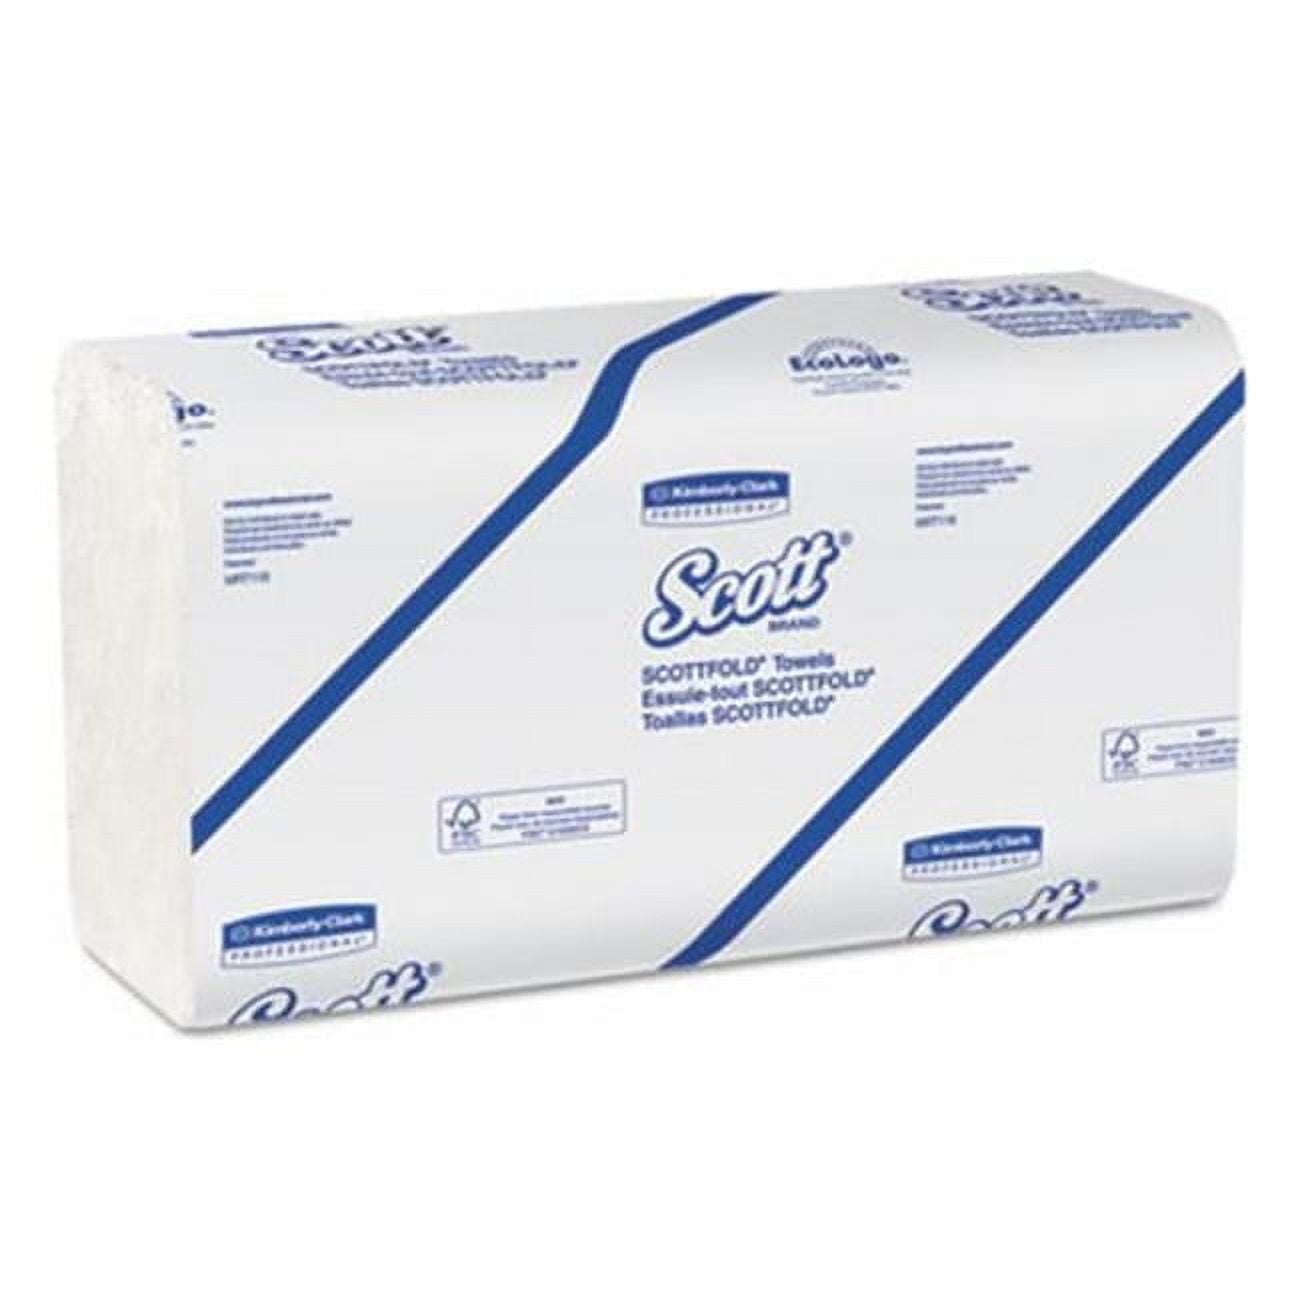 Picture of Kimberly-Clark 01960 CPC 1 ply Scott Scottfold Multi-Fold Paper Towels, White - Case of 4375